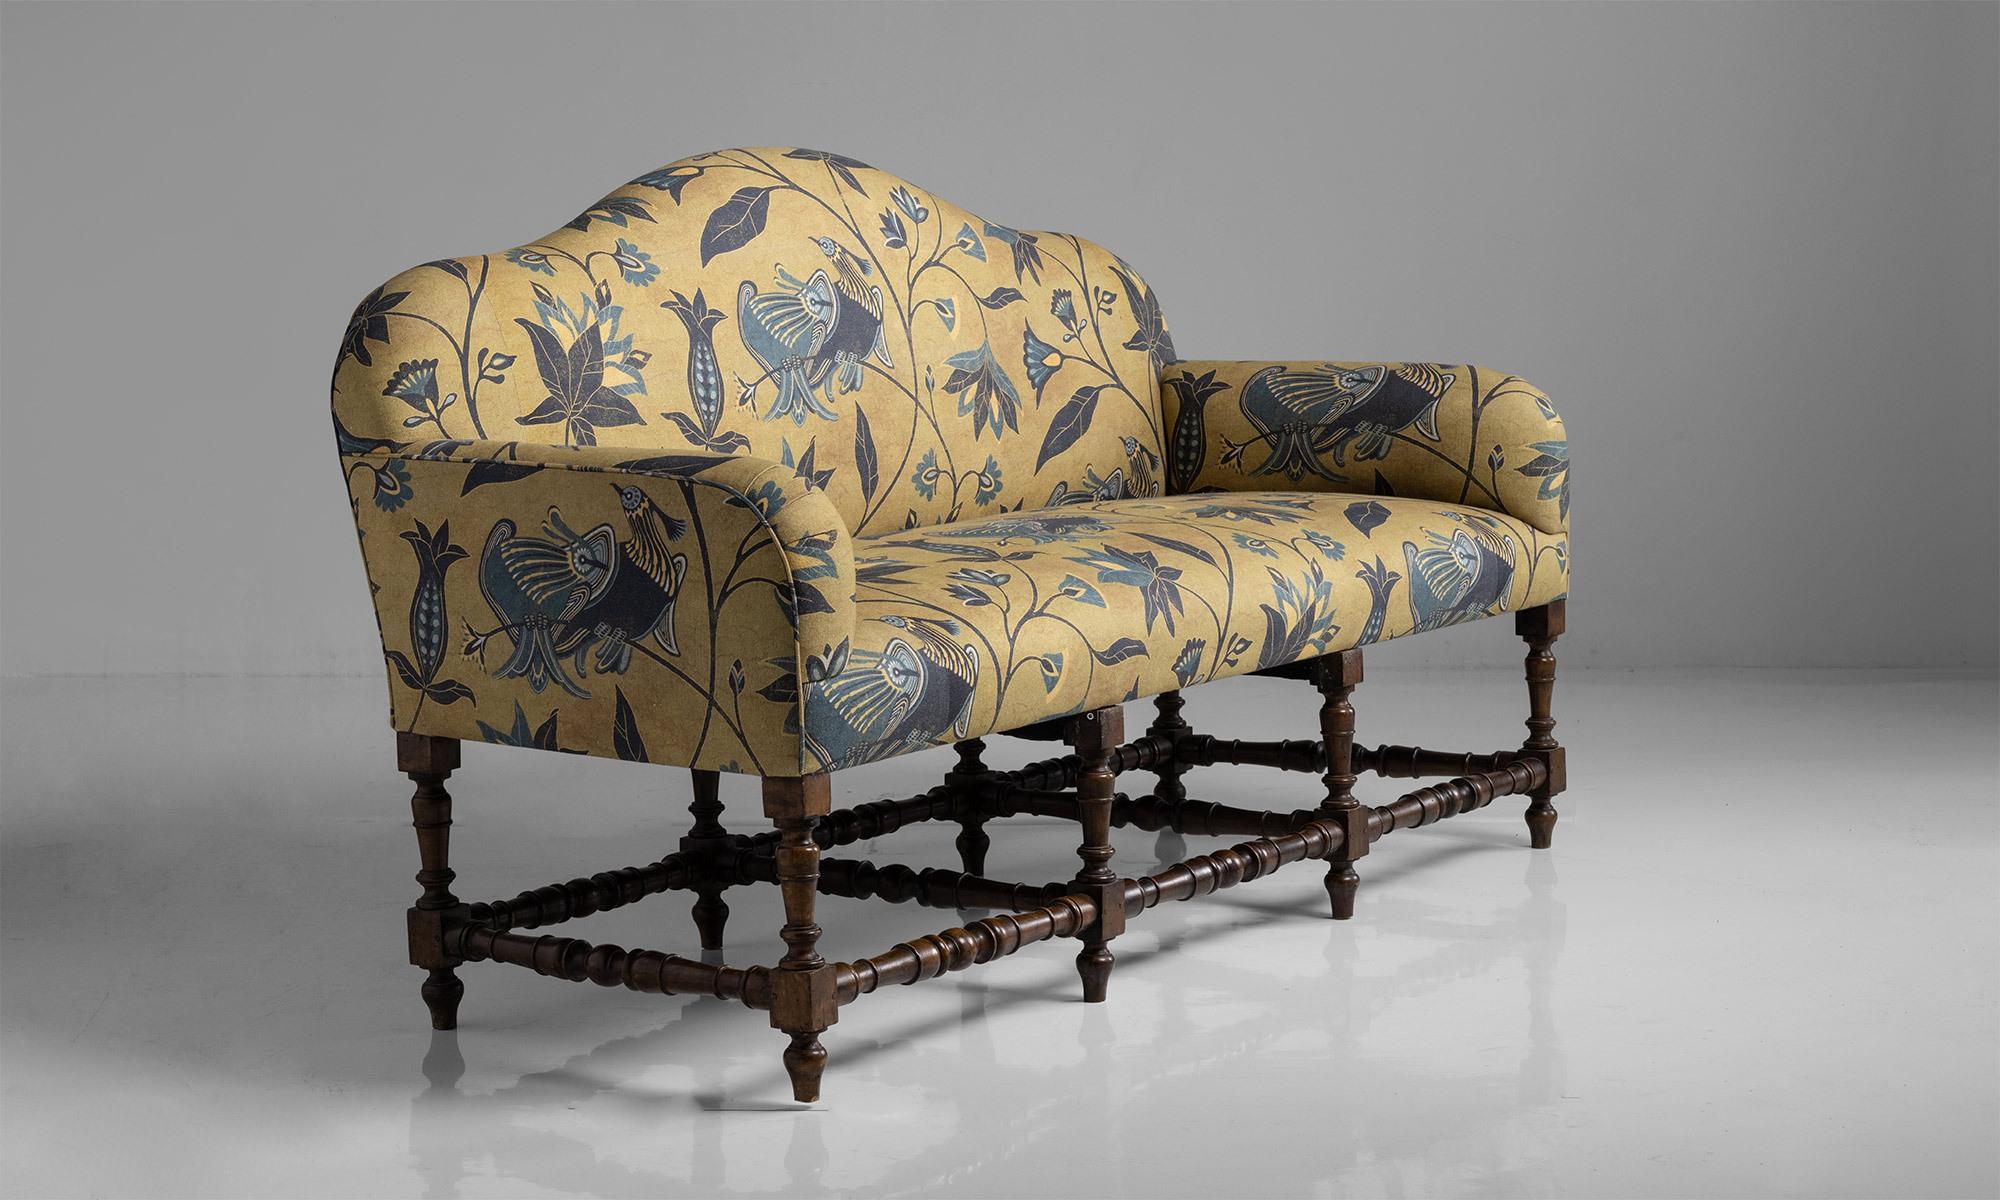 Camelback sofa in linen floral Print by James Malone

Italy Circa 1860

Newly upholstered in 100% cotton linen on handsome turned base in original finish.

Measures: 76